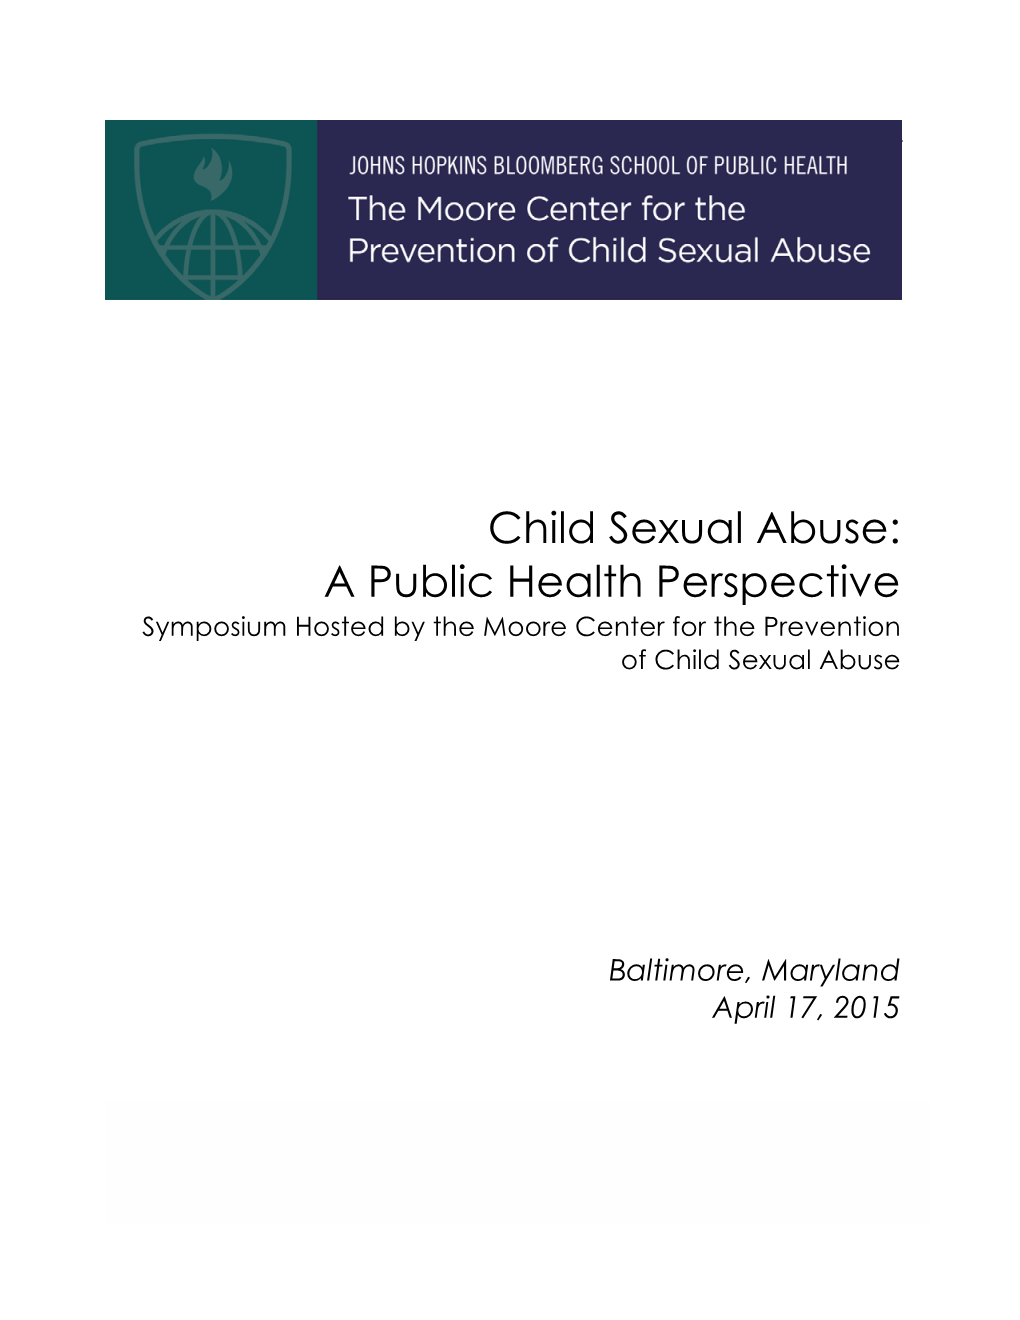 Child Sexual Abuse: a Public Health Perspective 2015 Page 1